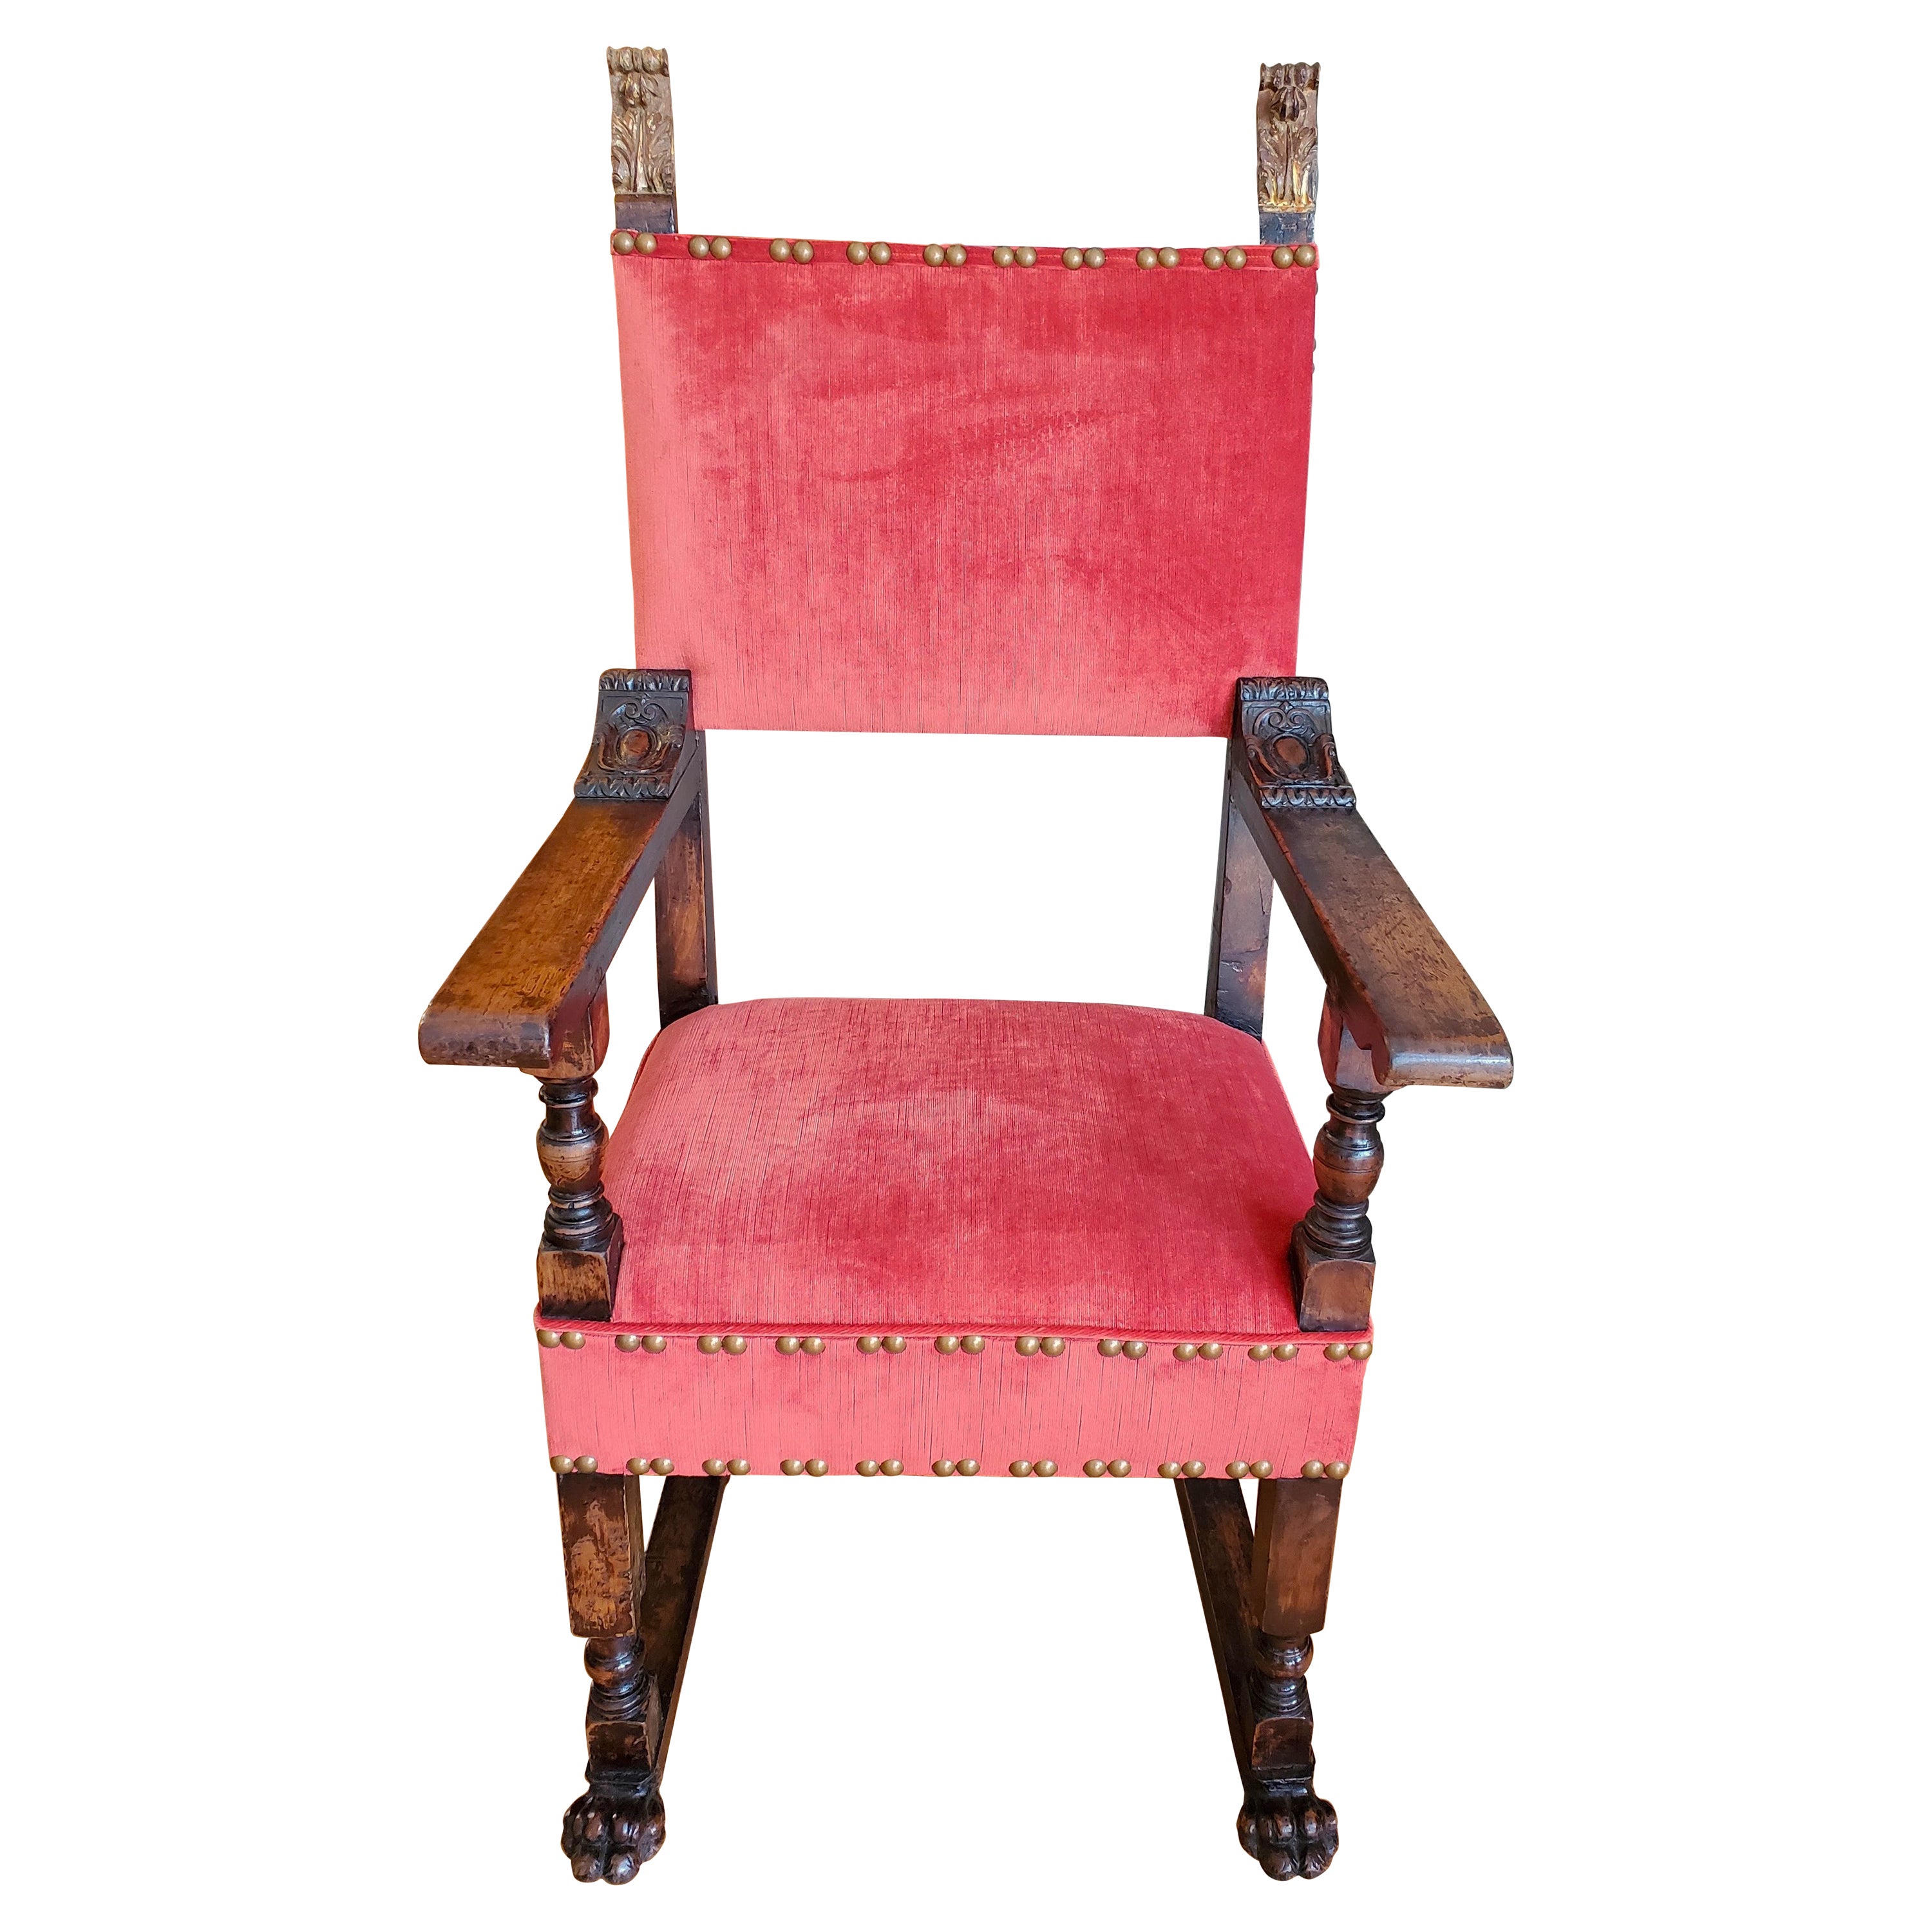 16th Century Italian Renaissance Walnut Armchair Reupholstered in Red Chenille